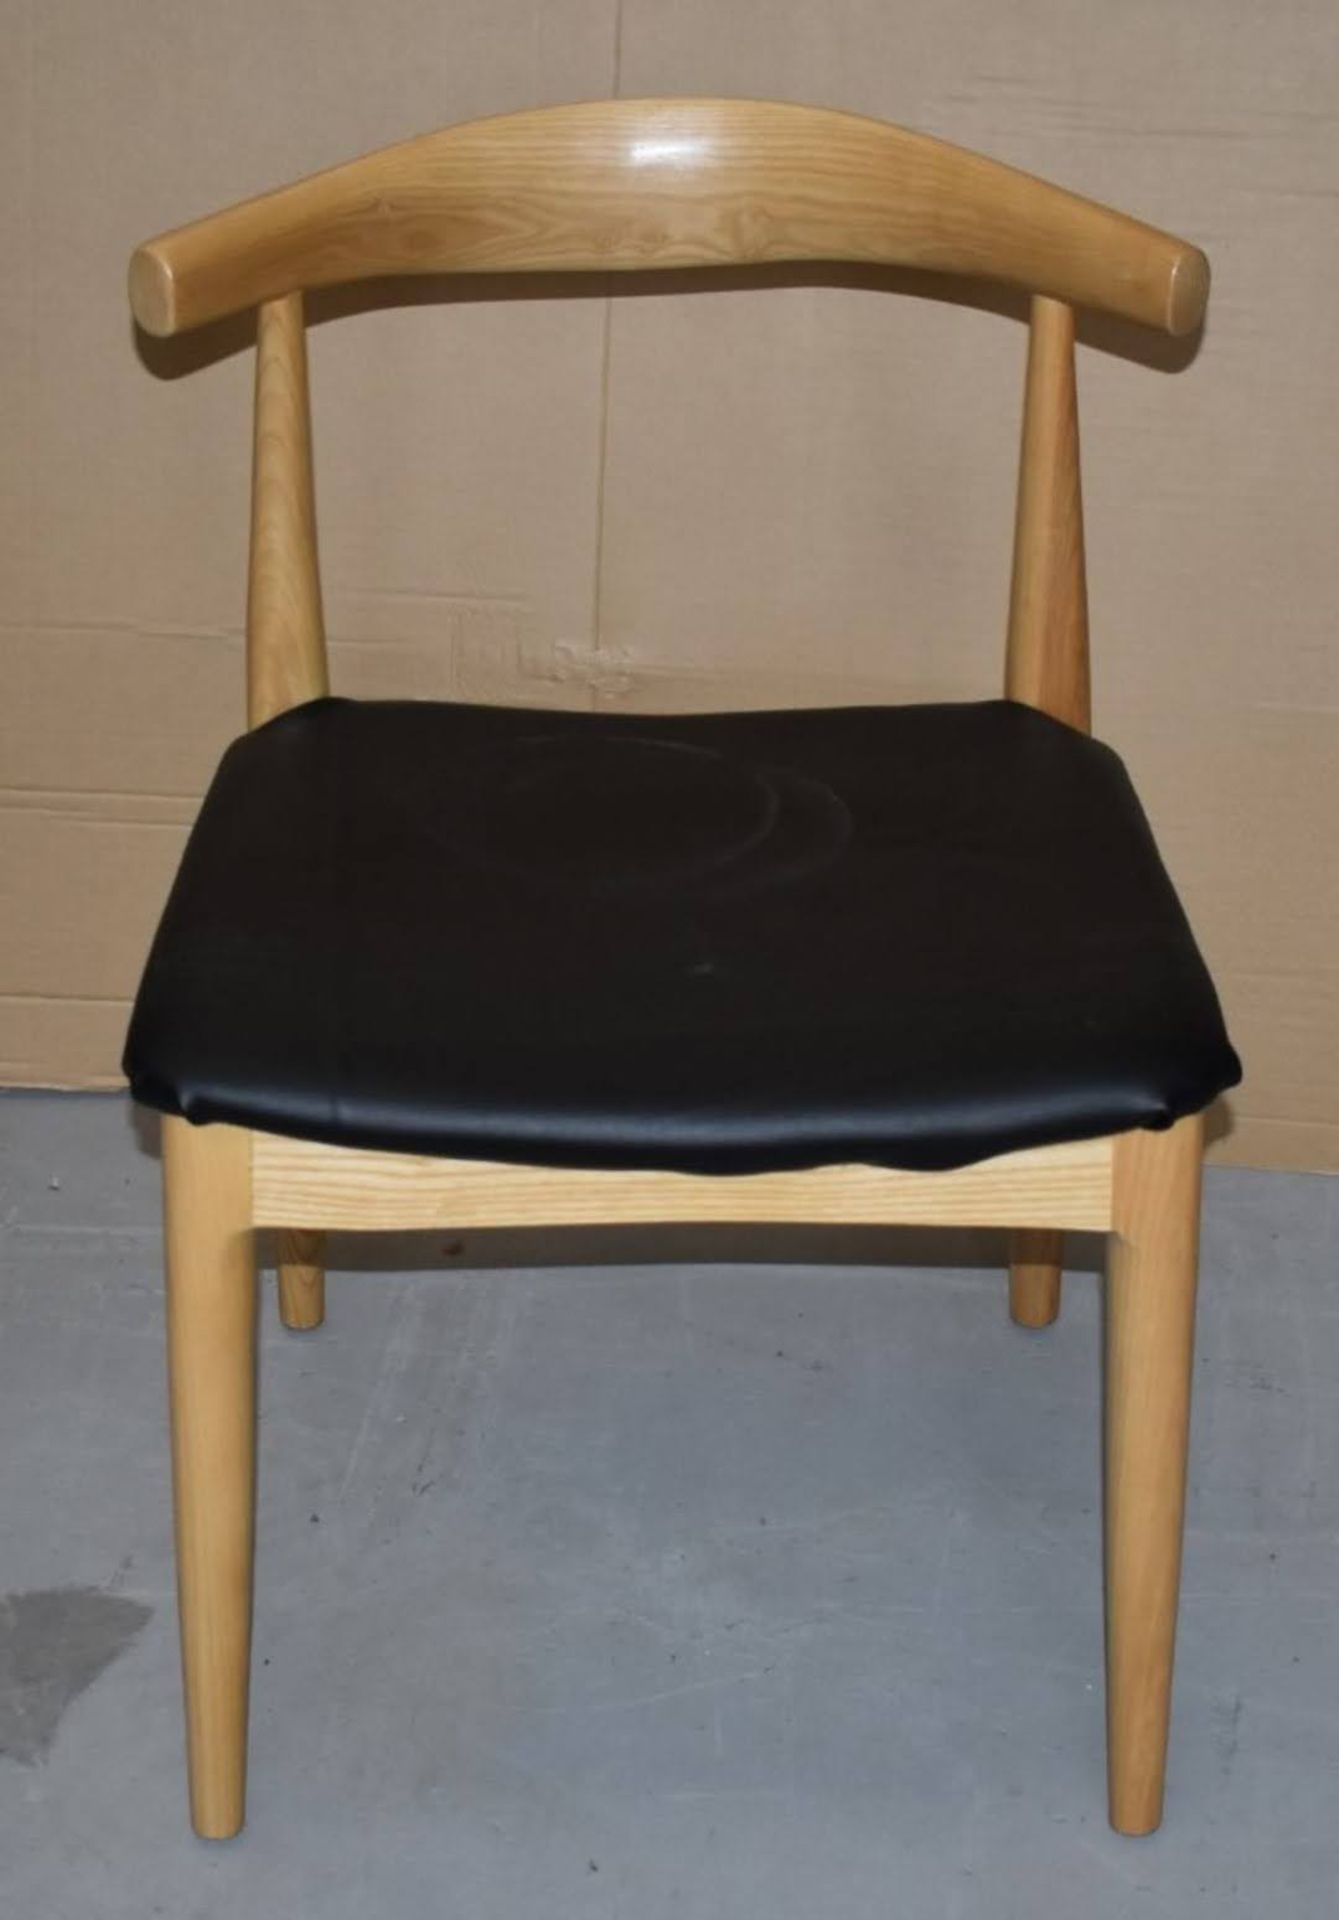 1 x Hans Wegner Inspired Elbow Chair - Solid Wood Chair With Light Stain Finish and Black Seat Pad - - Image 3 of 9